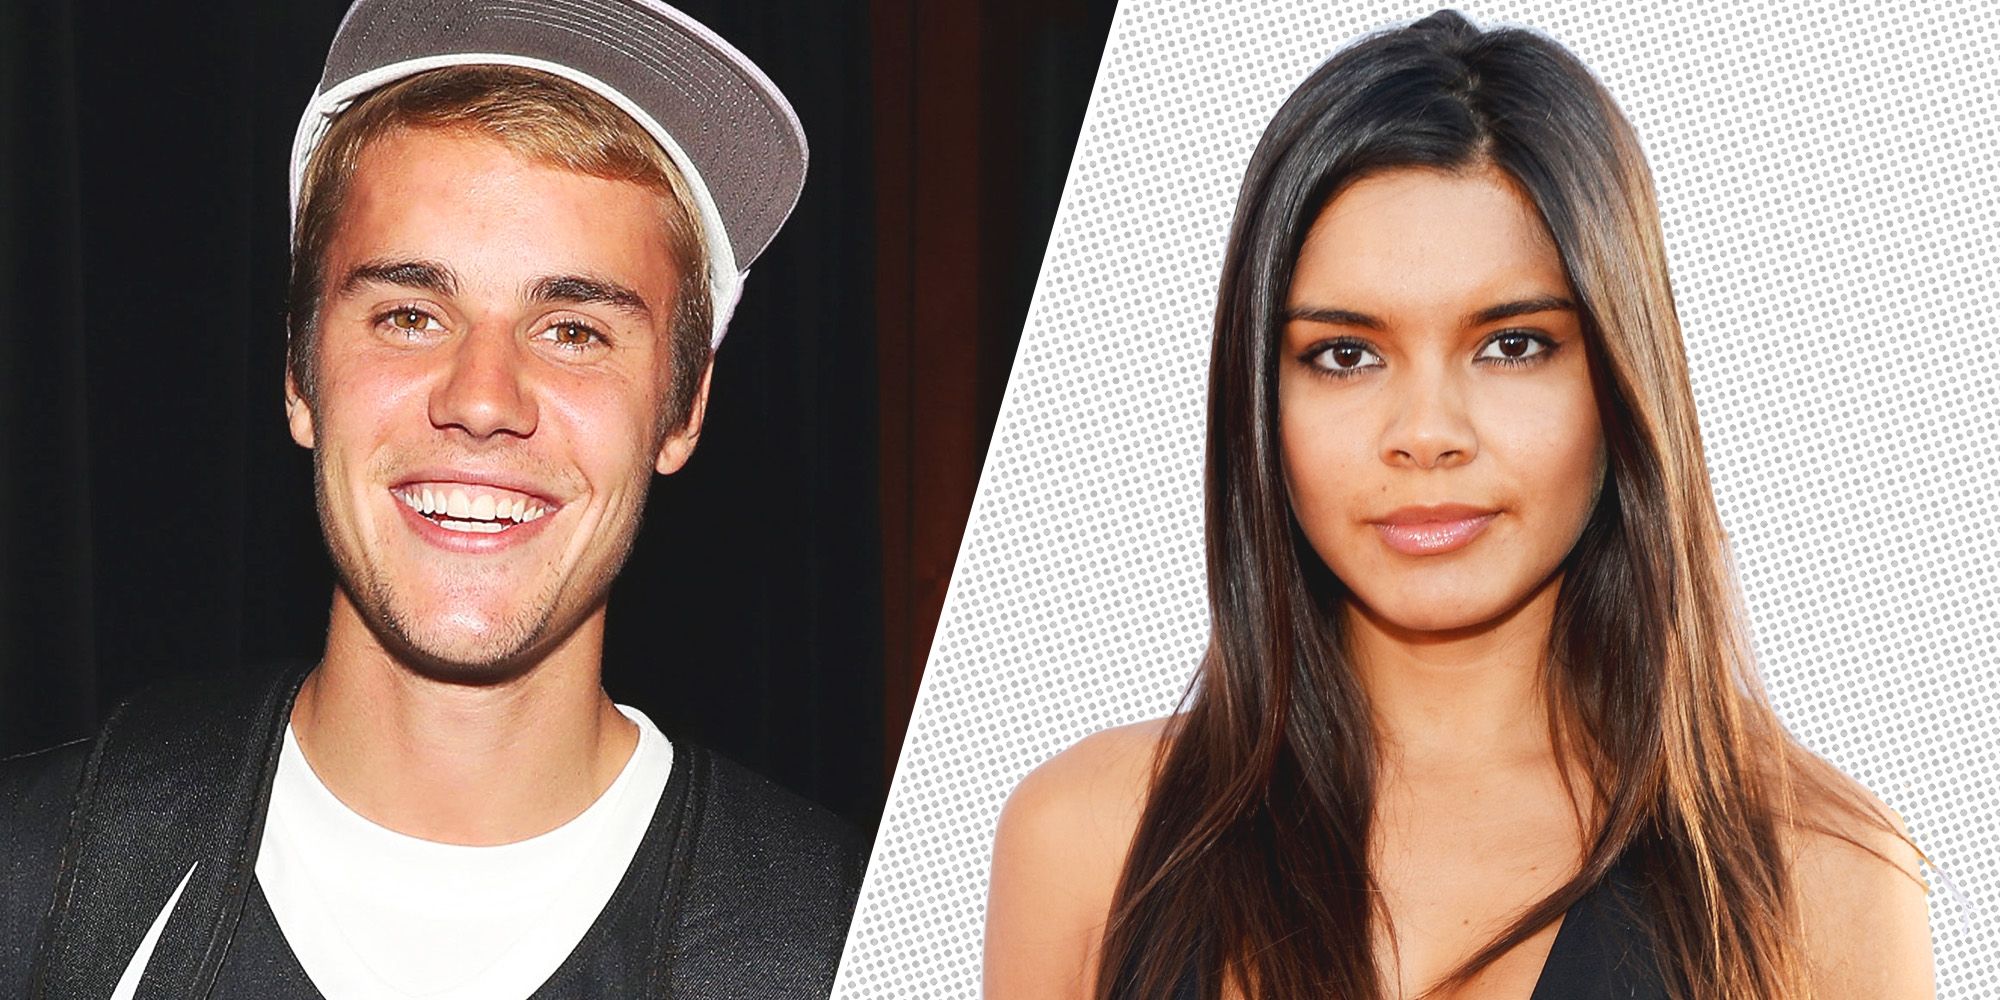 Justin Bieber and Paola Paulin Reportedly Dating - Justin Bieber Has New  Girlfriend Rumors